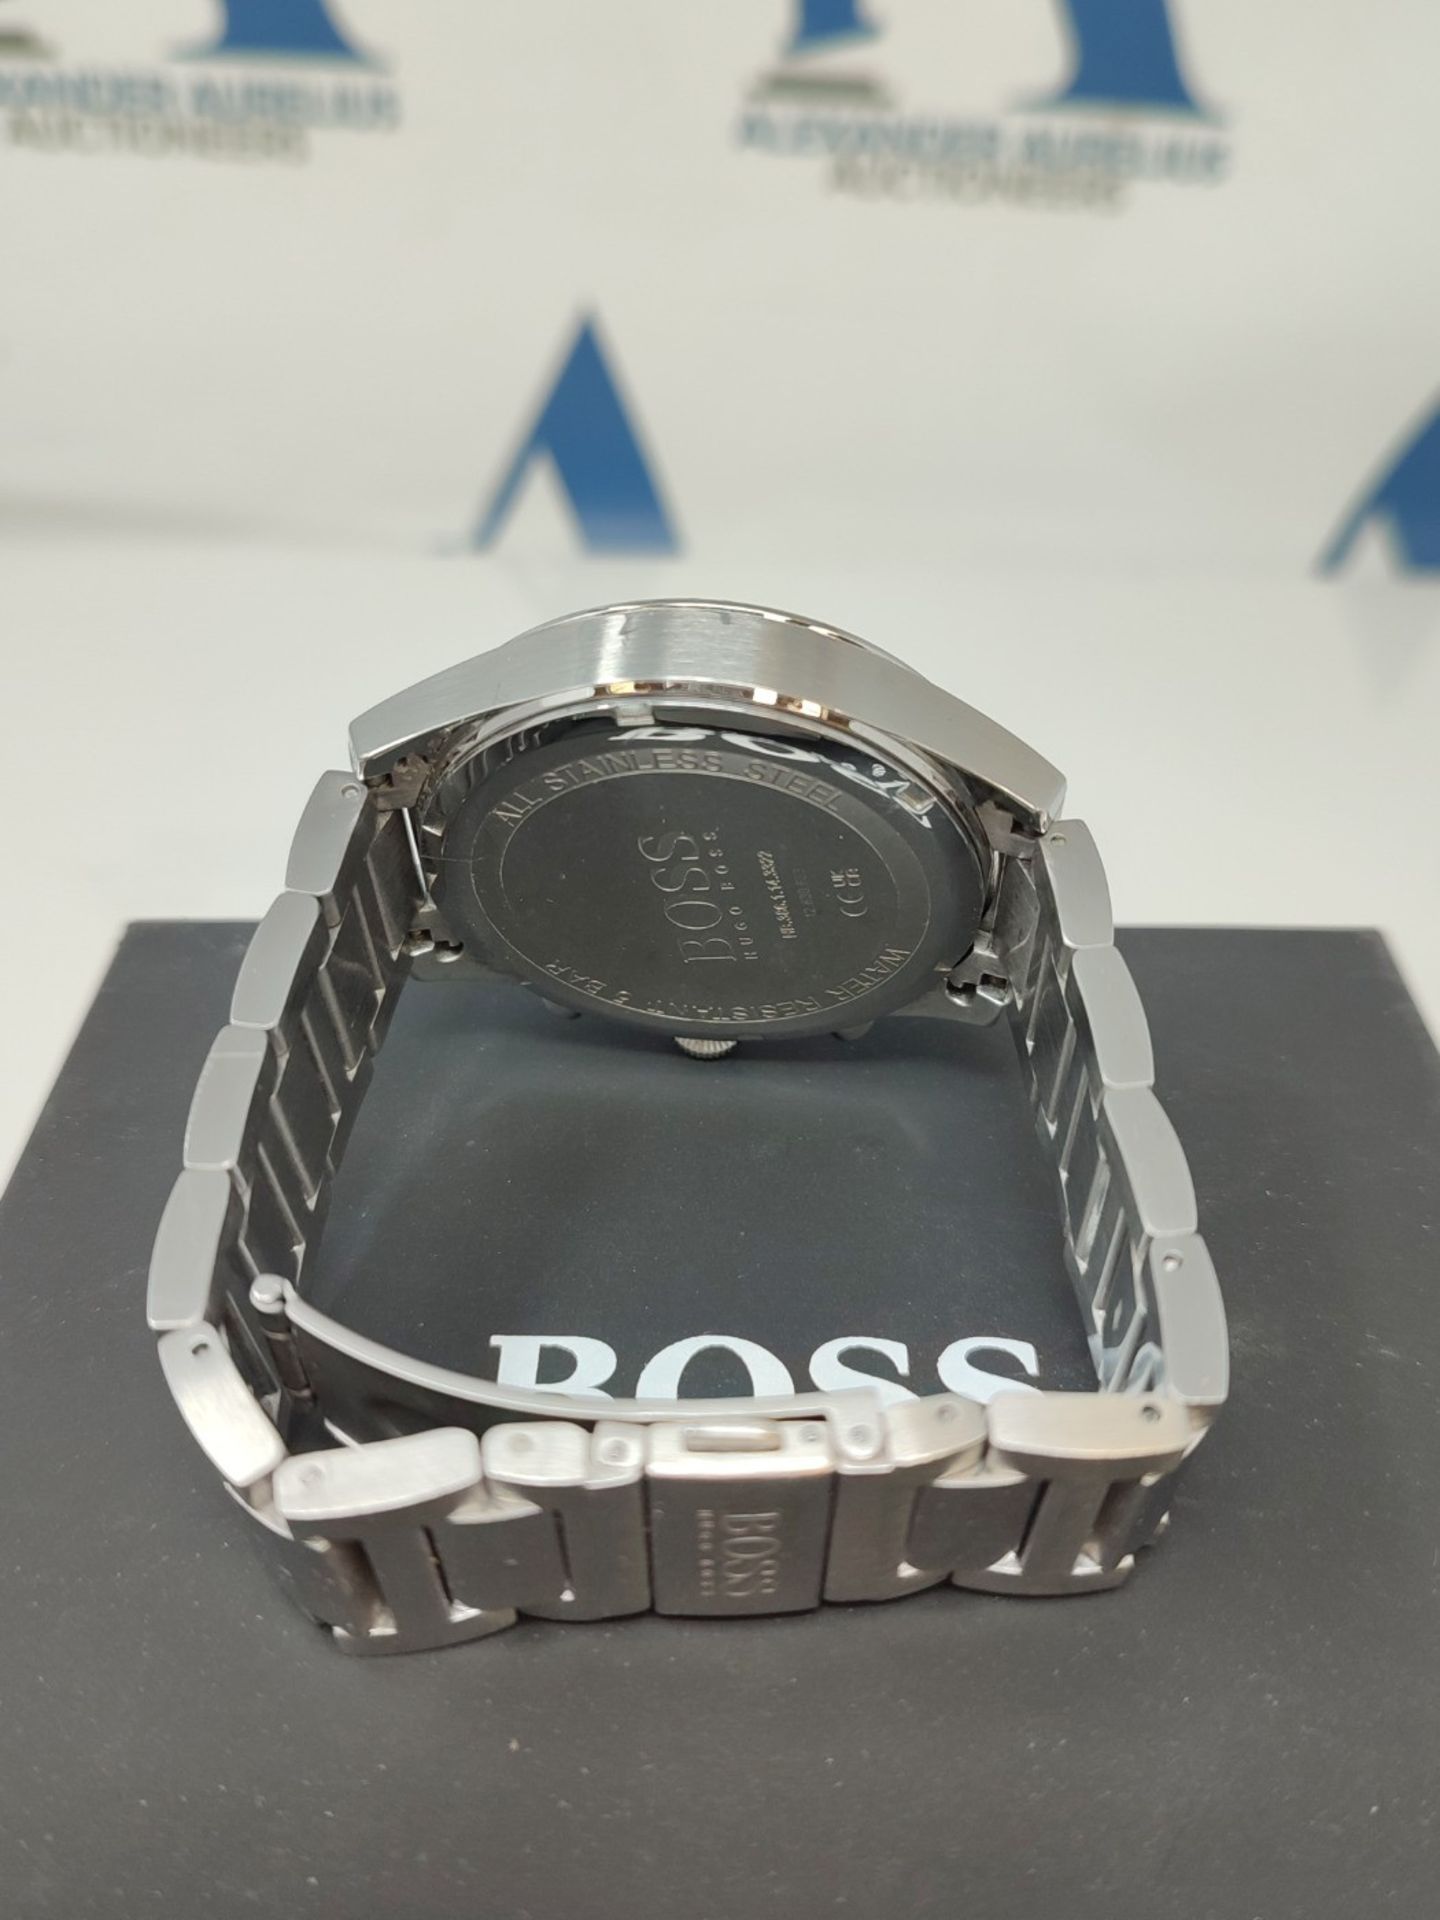 RRP £249.00 BOSS Chronograph Quartz Watch for Men with Silver Stainless Steel Bracelet - 1513712 - Image 6 of 6